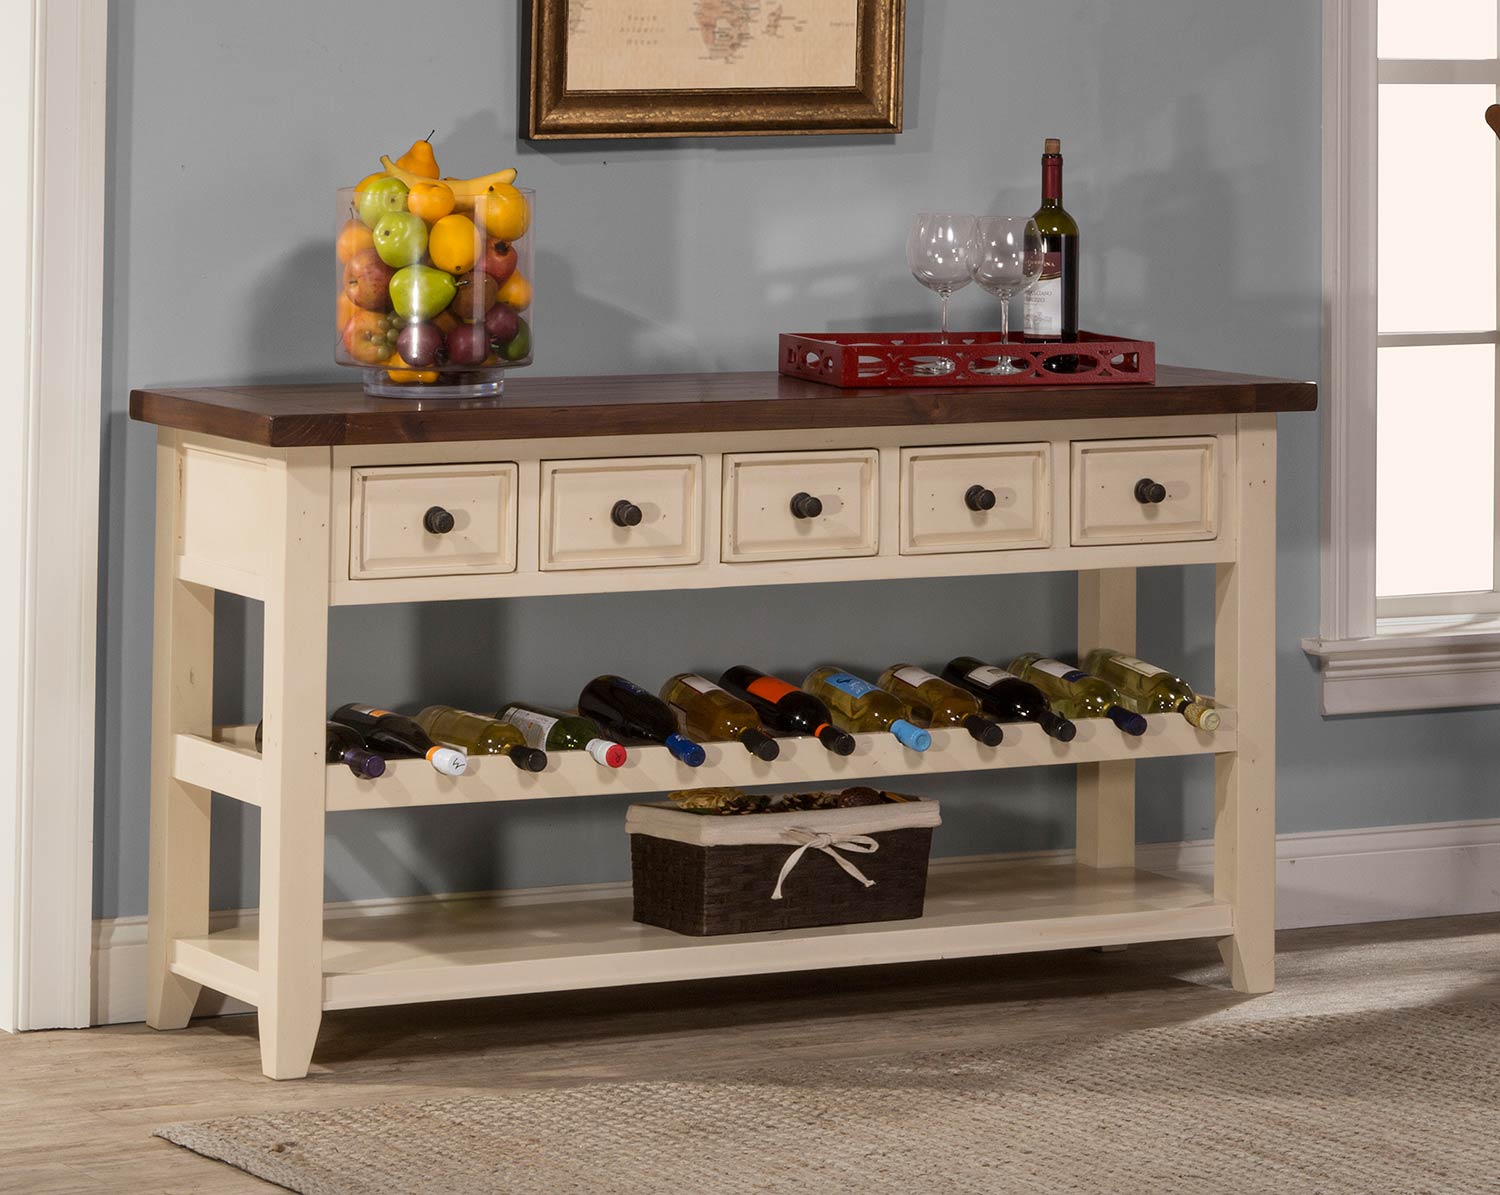 Hillsdale Tuscan Retreat Wine Rack Hall Table with Five Drawers - Country White/Antique Pine Top